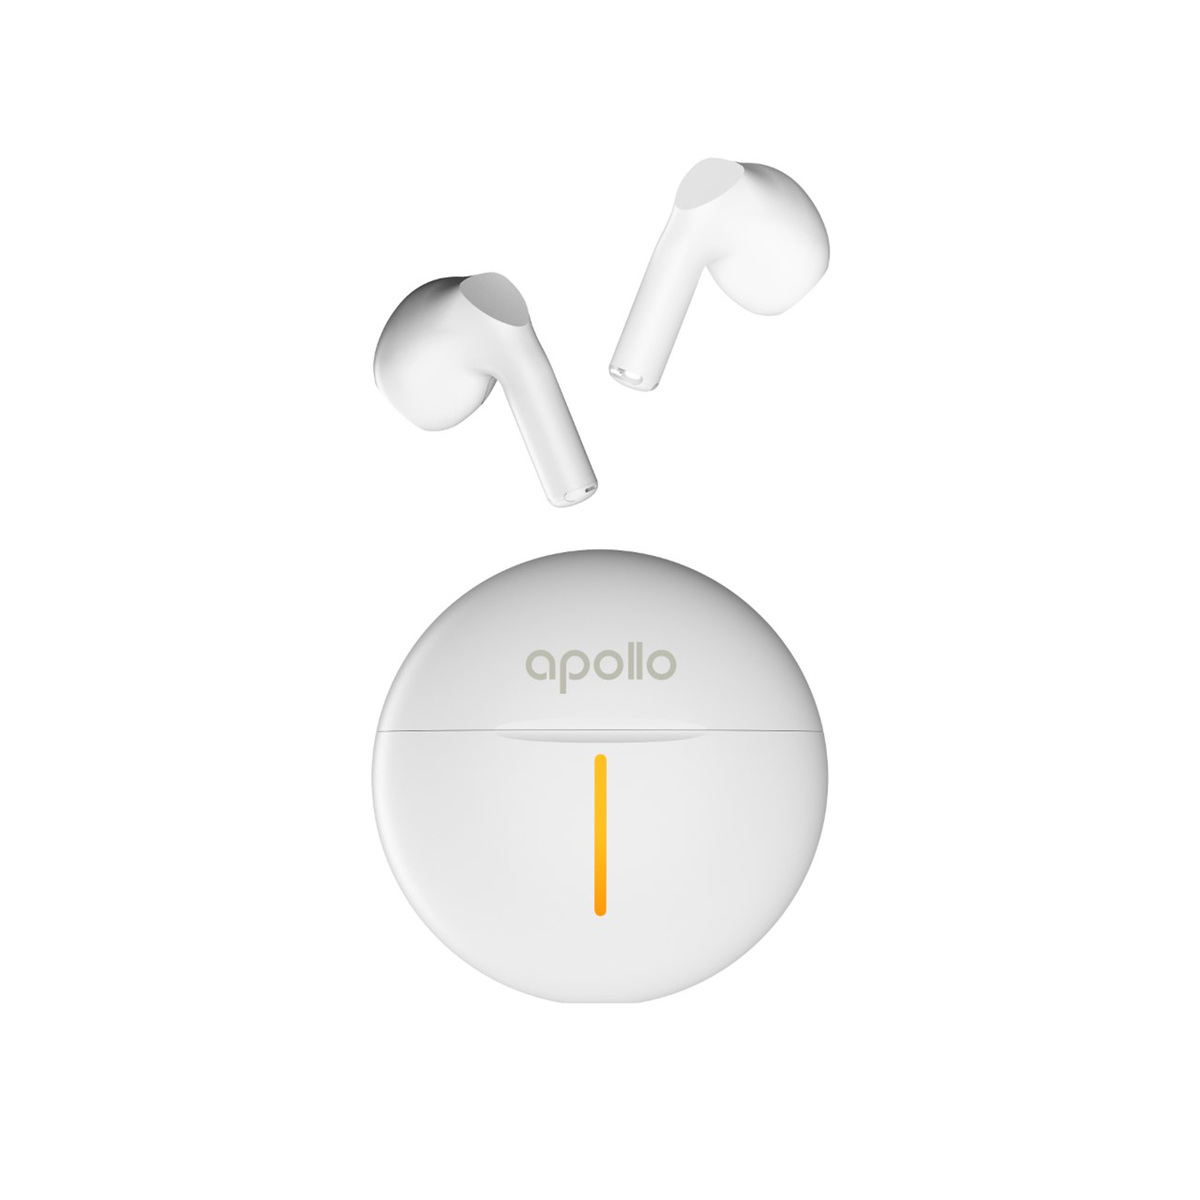 Modern Bluetooth Earbuds - Wireless Design - 4 Colors Available from Apollo  Box